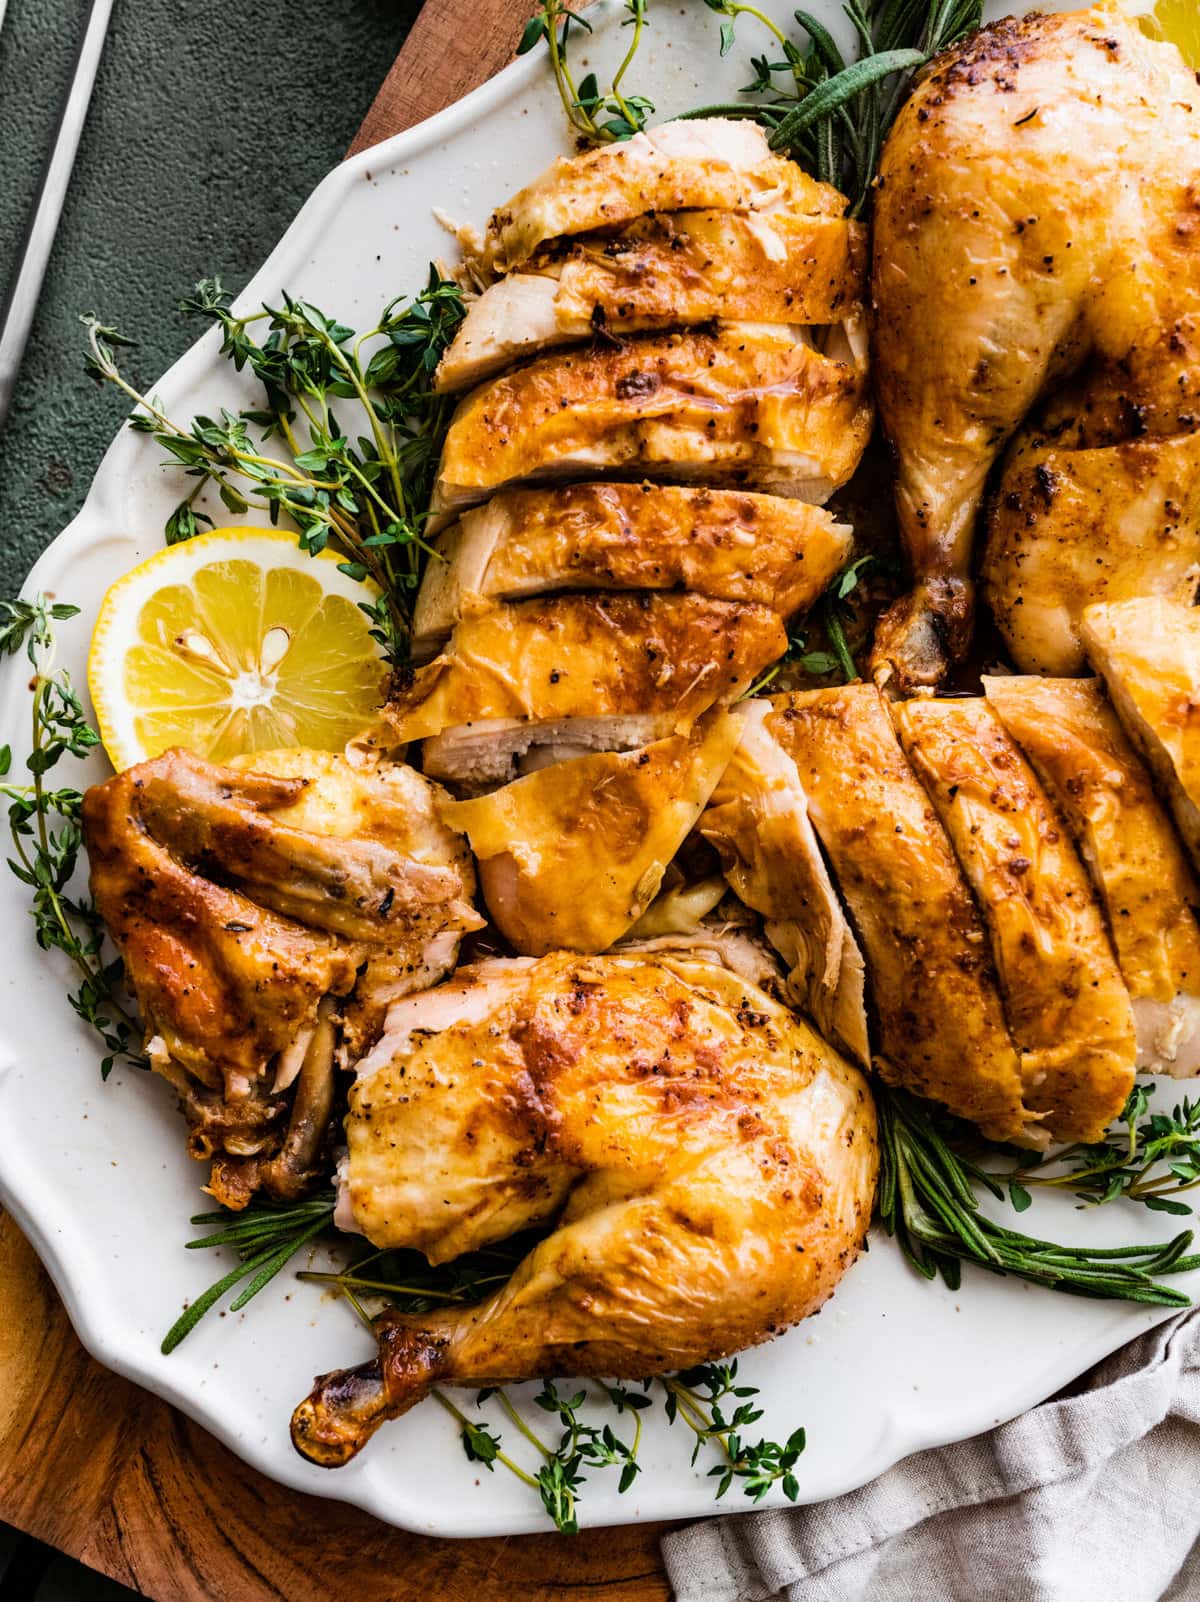 whole chicken recipe perfect and juicy. finished chicken cut and on a pretty platter with herbs and lemons as decoration.